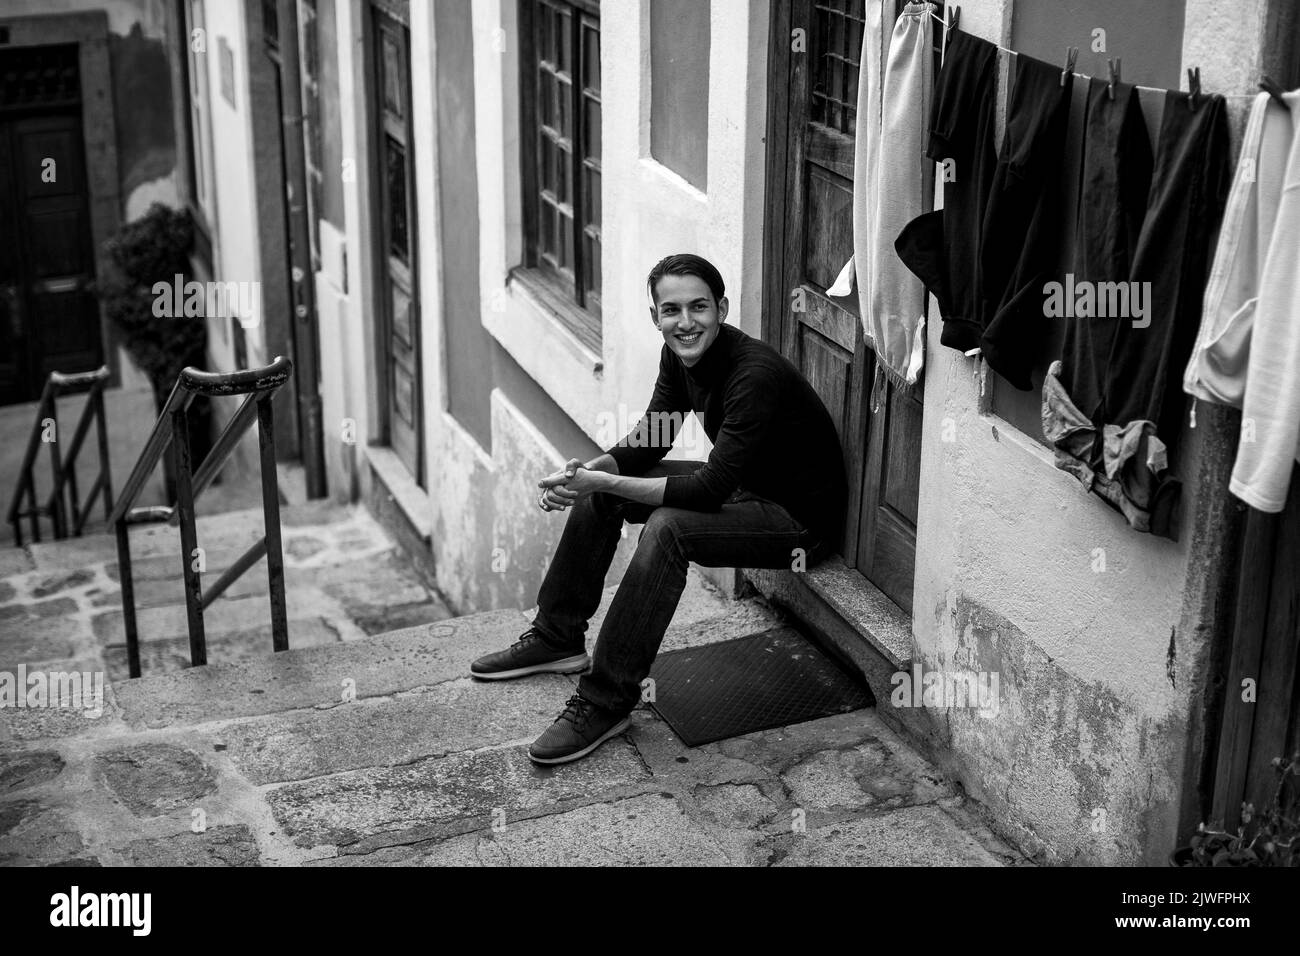 Handsome young man sitting on the steps of a narrow street in an old downtown European city. Black and white photograph. Stock Photo